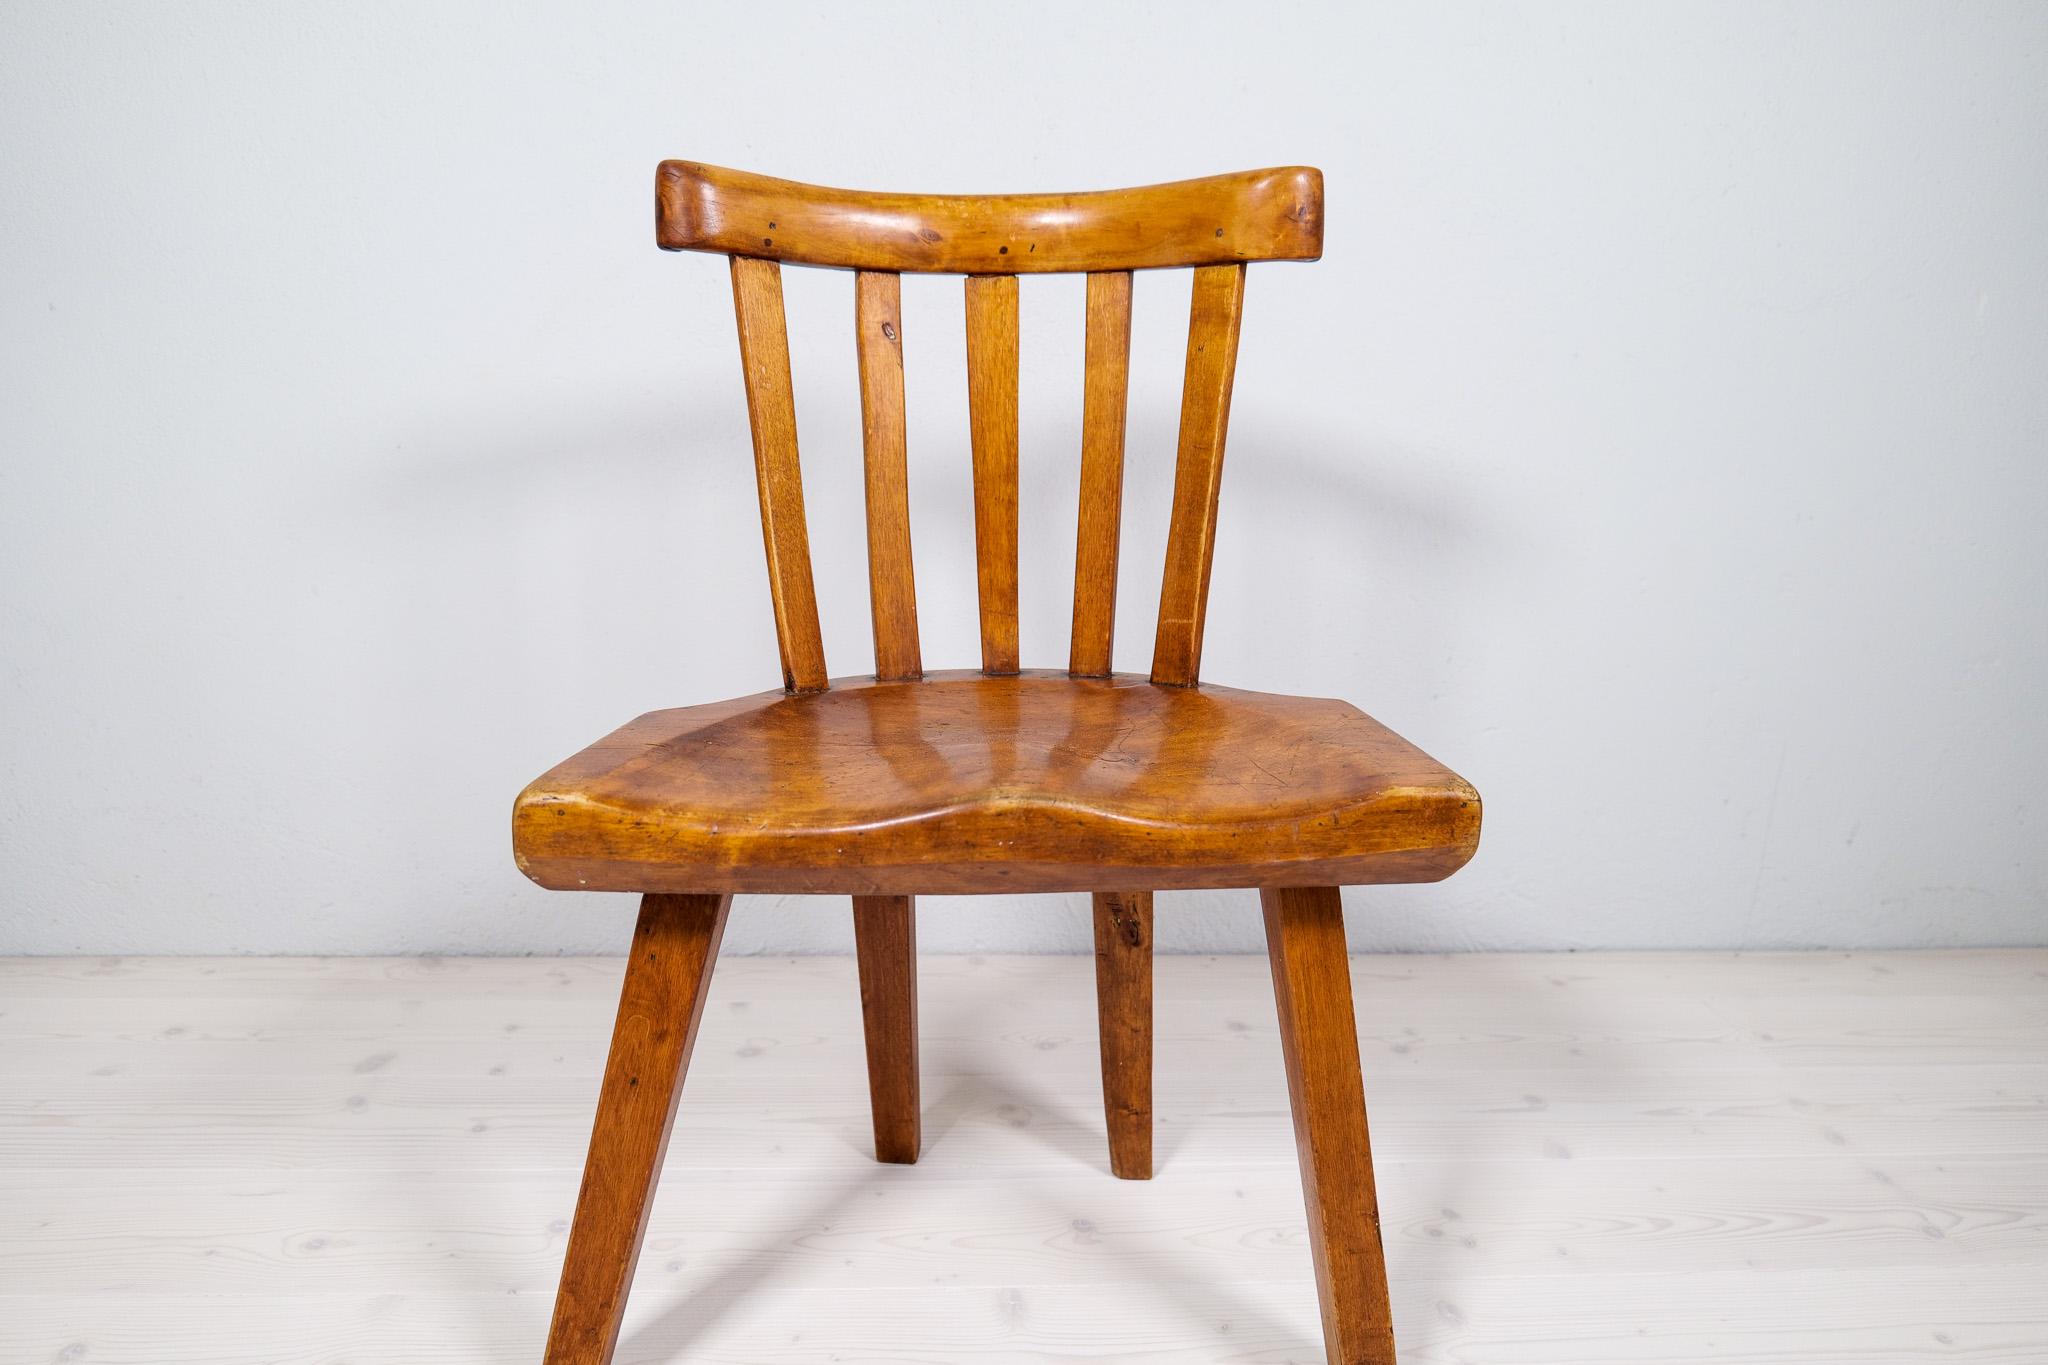 19th Century Swedish Folk Art Chair in Higly Decorative Shapes For Sale 1